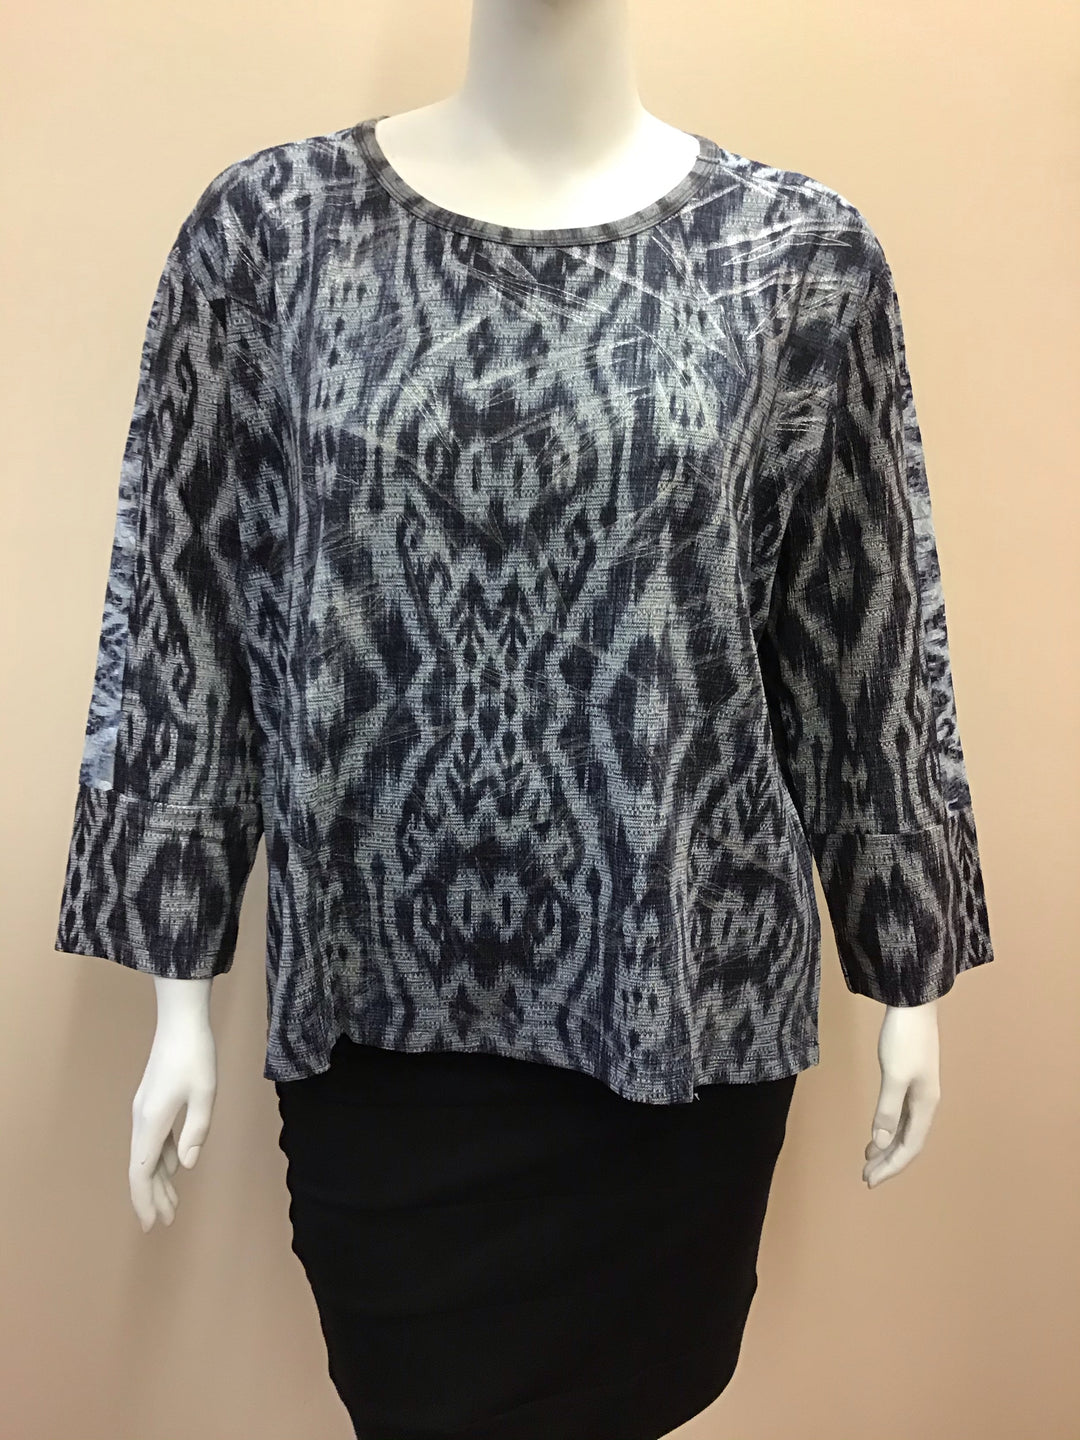 Knit Printed Lace Top - 3/4 Sleeve